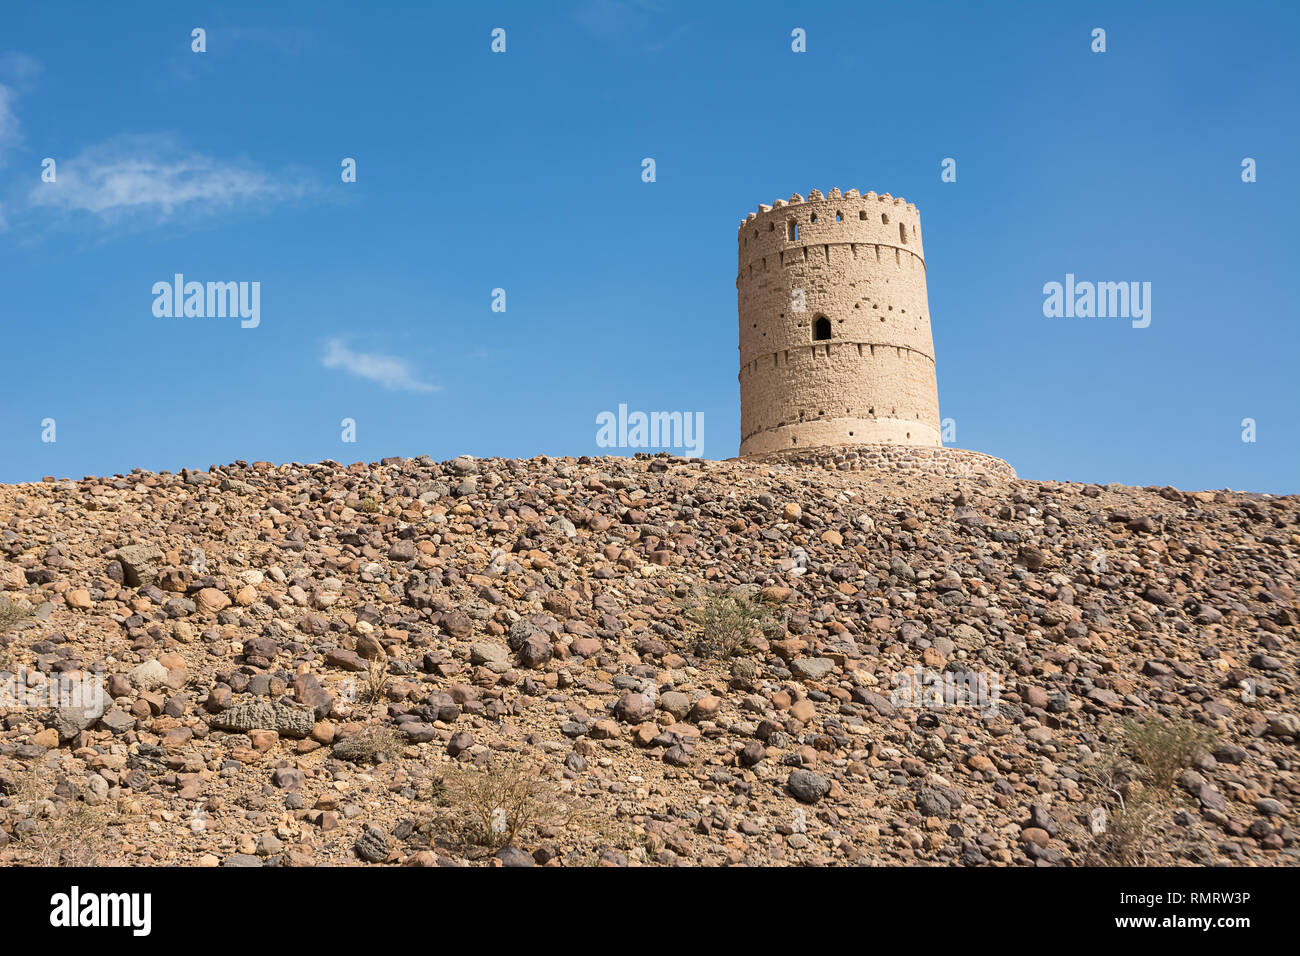 Ancient tower on top of a rocky hill in Oman Stock Photo